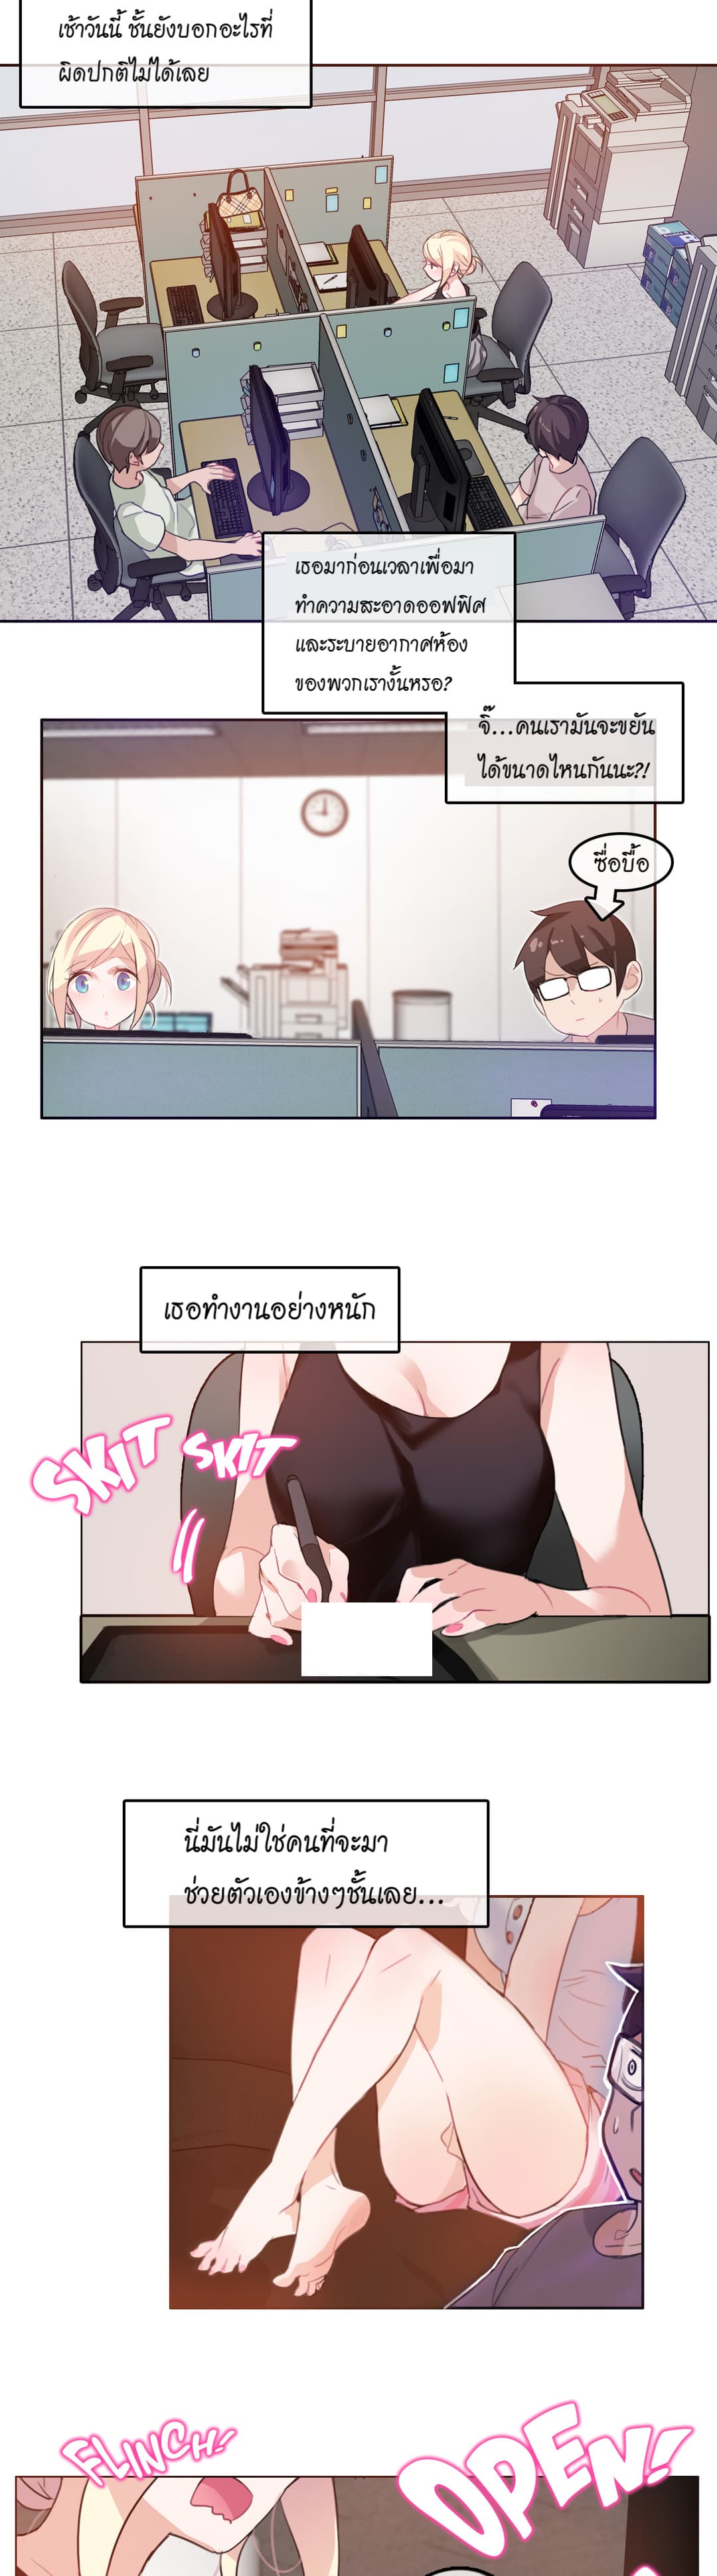 A Pervert’s Daily Life 5 (8)